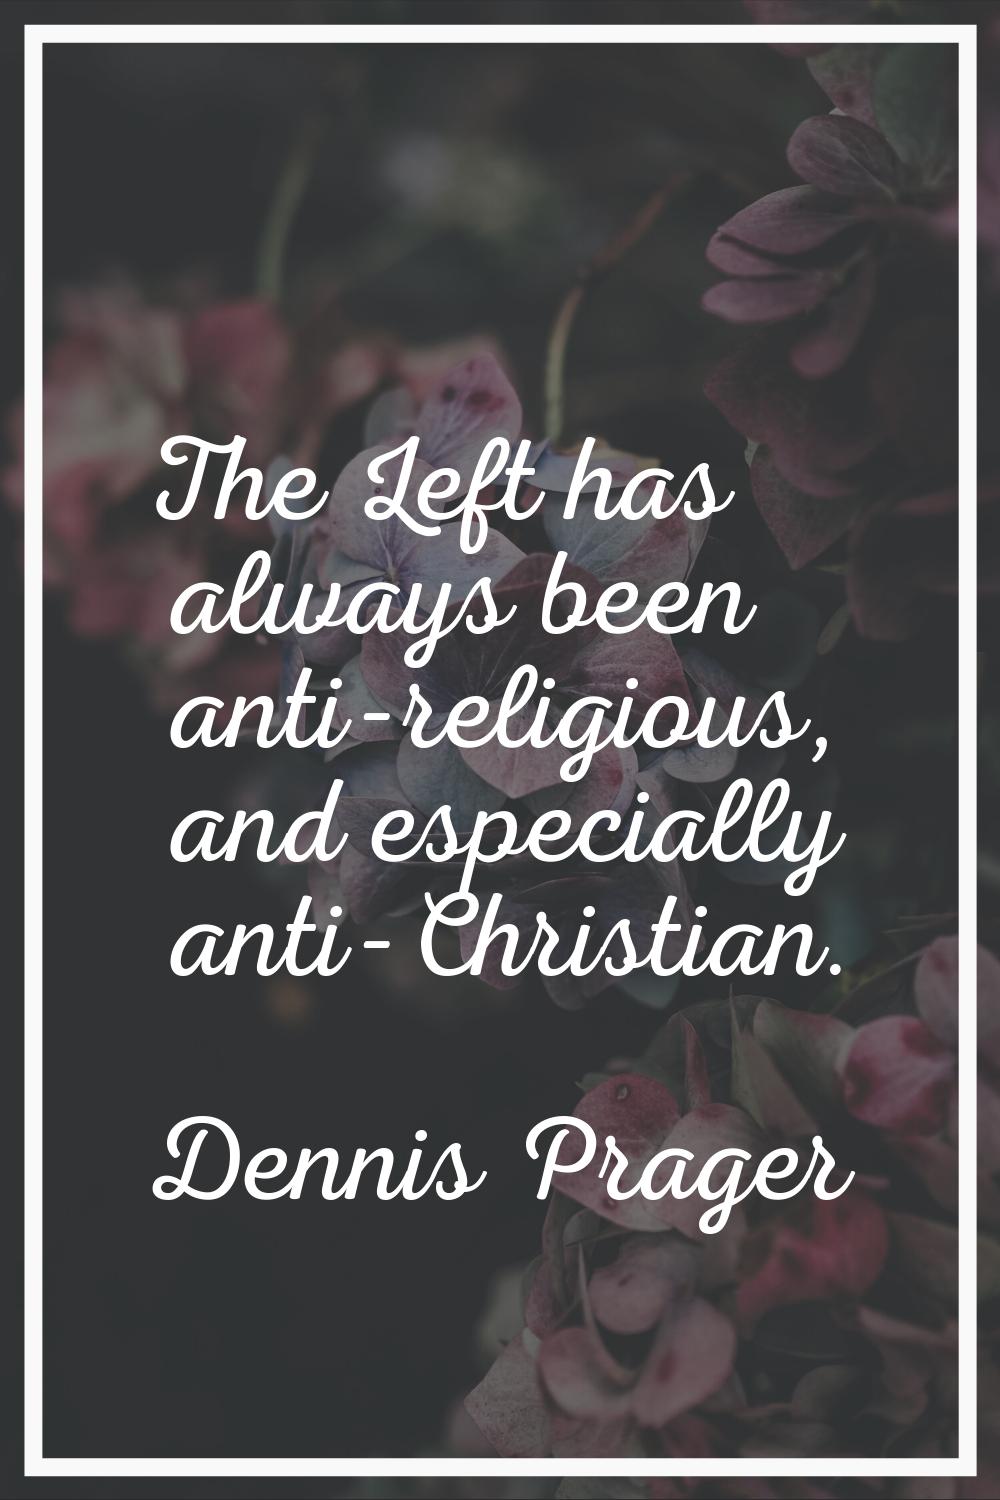 The Left has always been anti-religious, and especially anti-Christian.